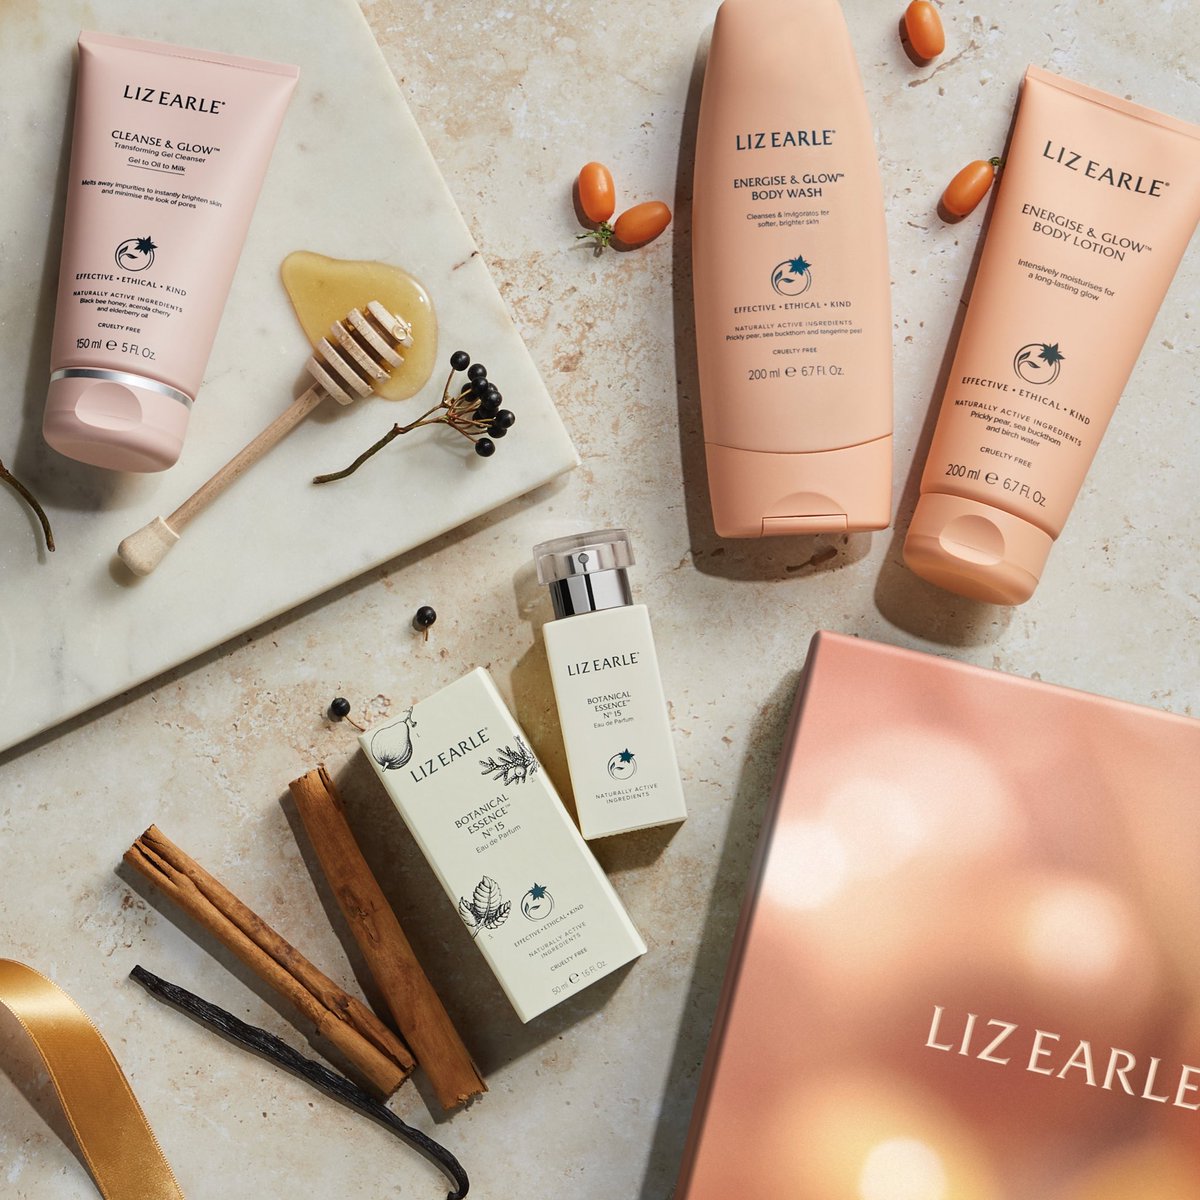 🔆 TSV chats on social, this week: join Sarah & me tonight for our @lizearle Insta at 20.30 (we’re #lizearlebeautyco there) & join @AliYoungBeauty & Sarah for a Facebook Live @qvcuk Thursday 5pm, during our TSV day 🔆